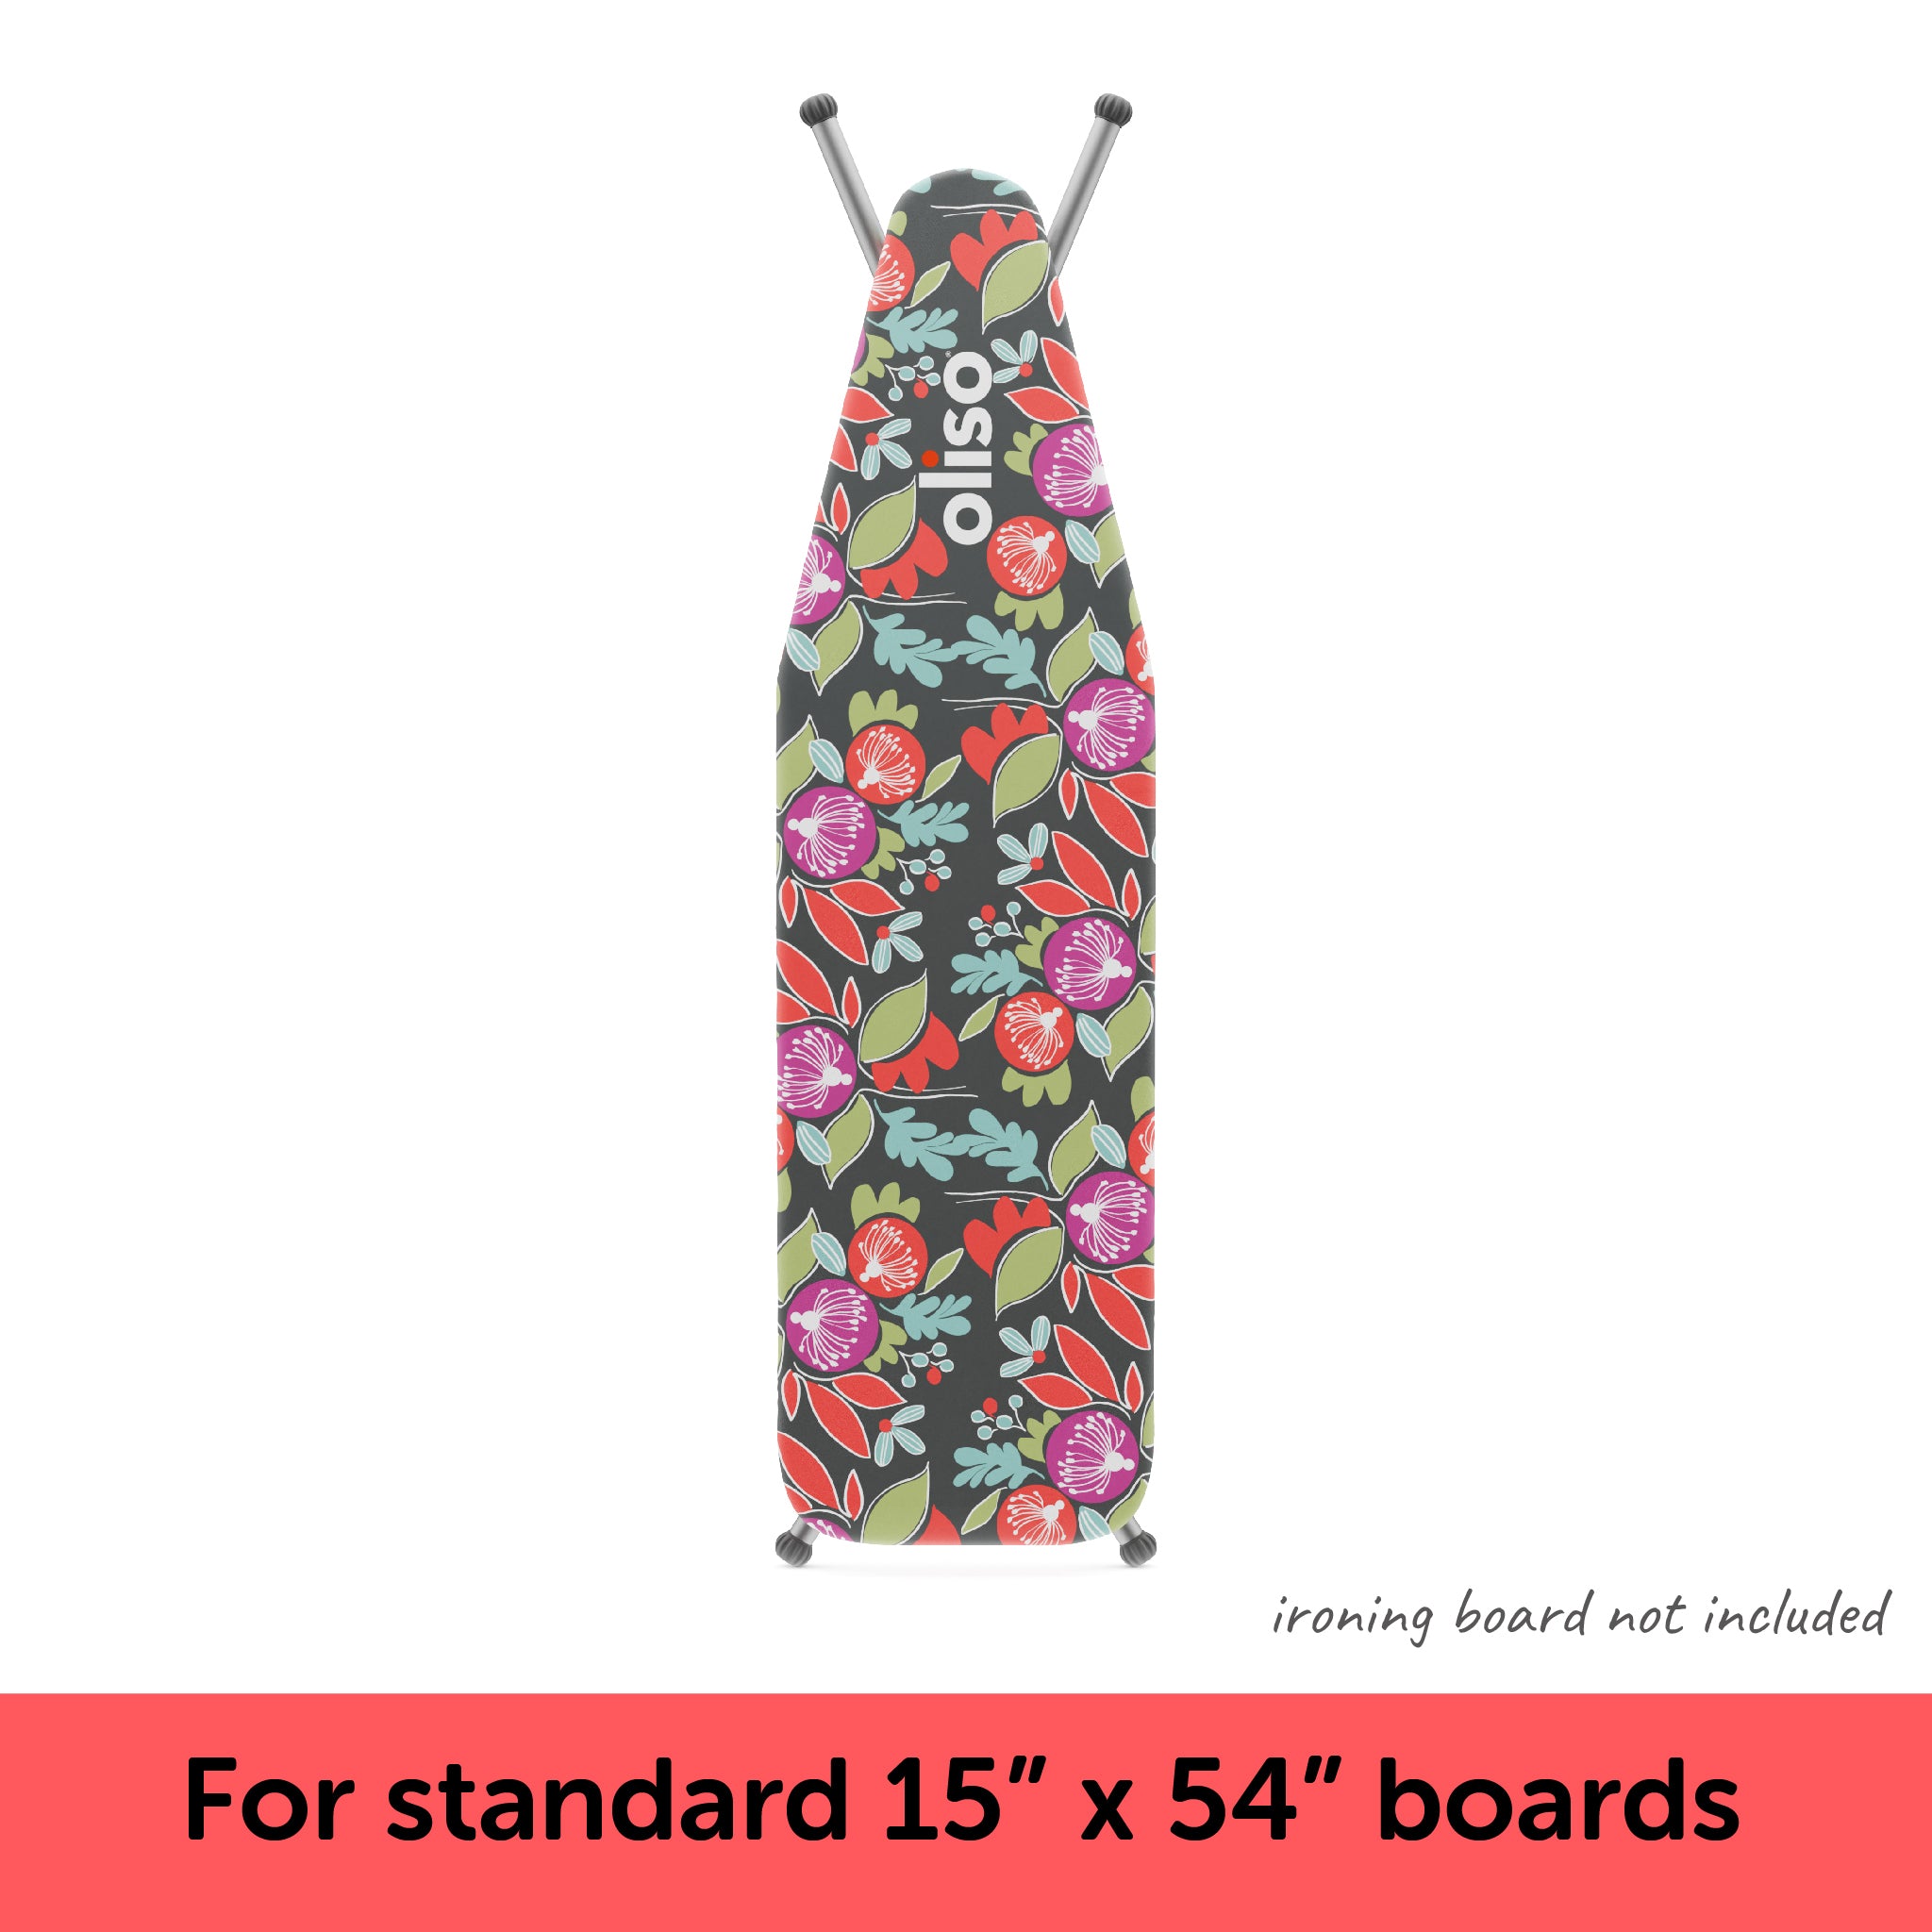 The Oliso Iron Board Cover showing that it fits on a standard 54&quot; x 15&quot; ironing board.